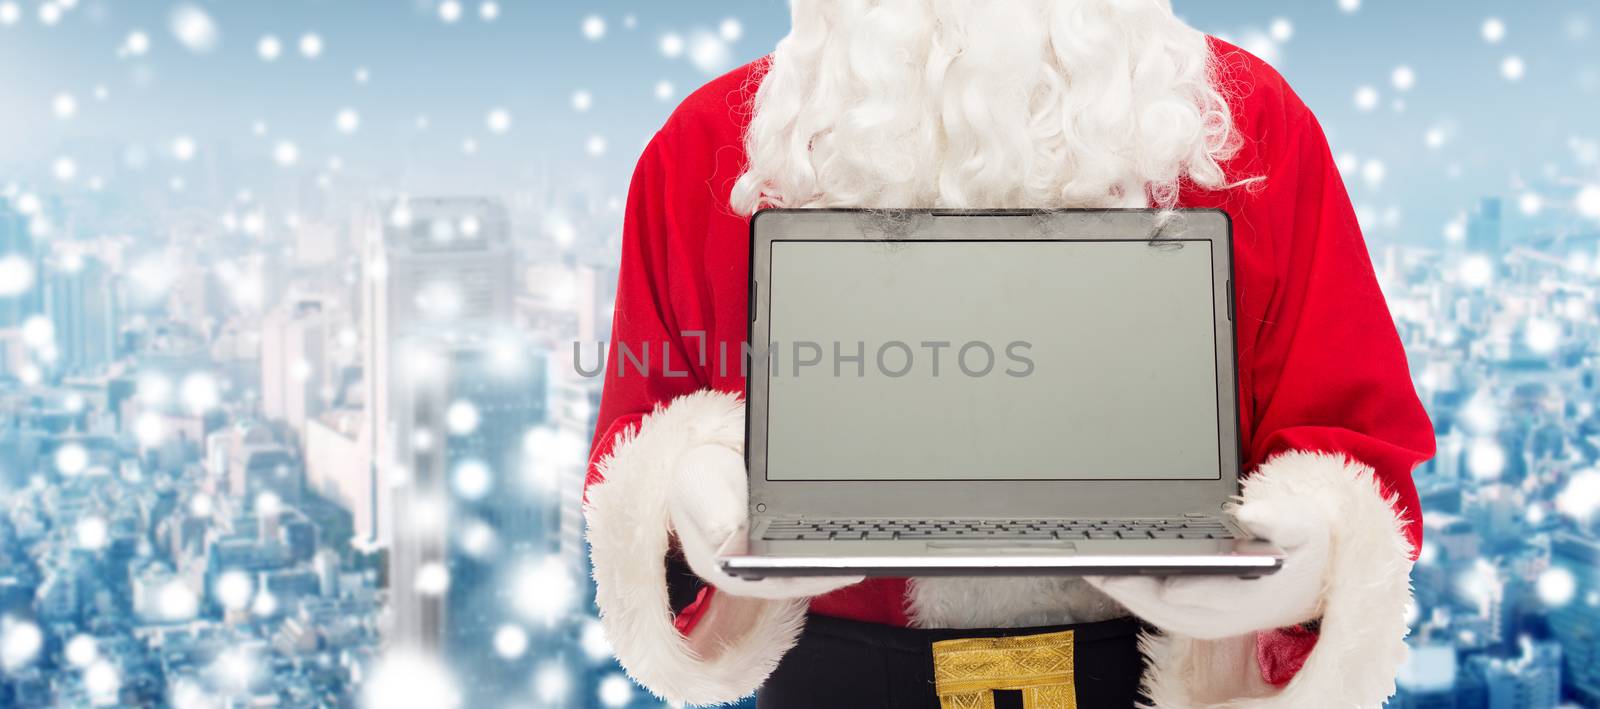 christmas, advertisement, technology, and people concept - close up of santa claus with laptop computer over snowy city background